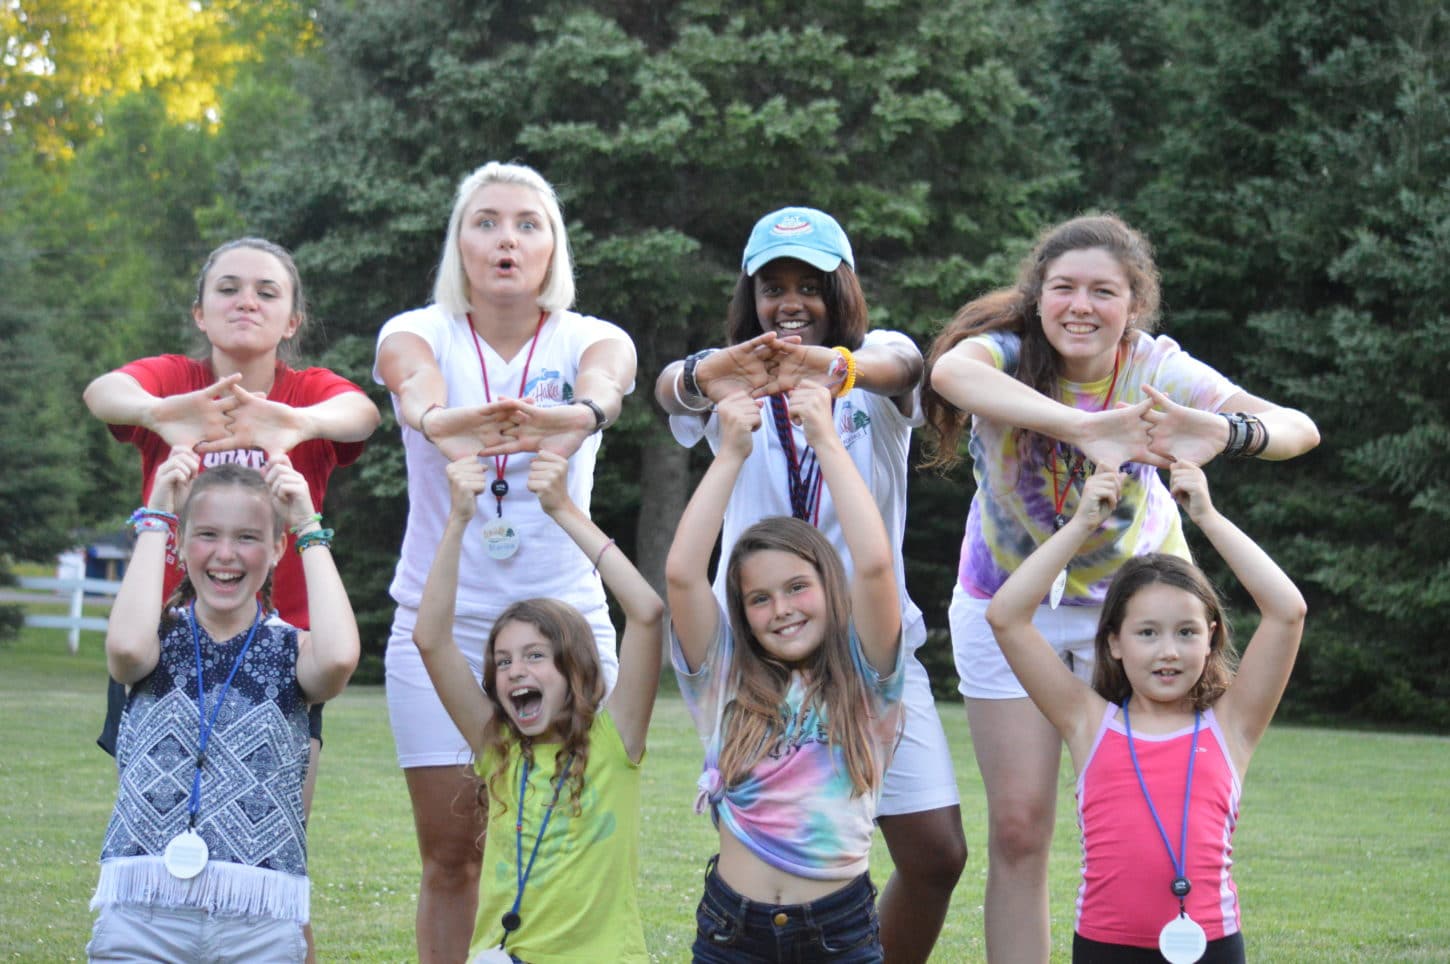 Staff and campers being silly at WeHaKee Camp for Girls.